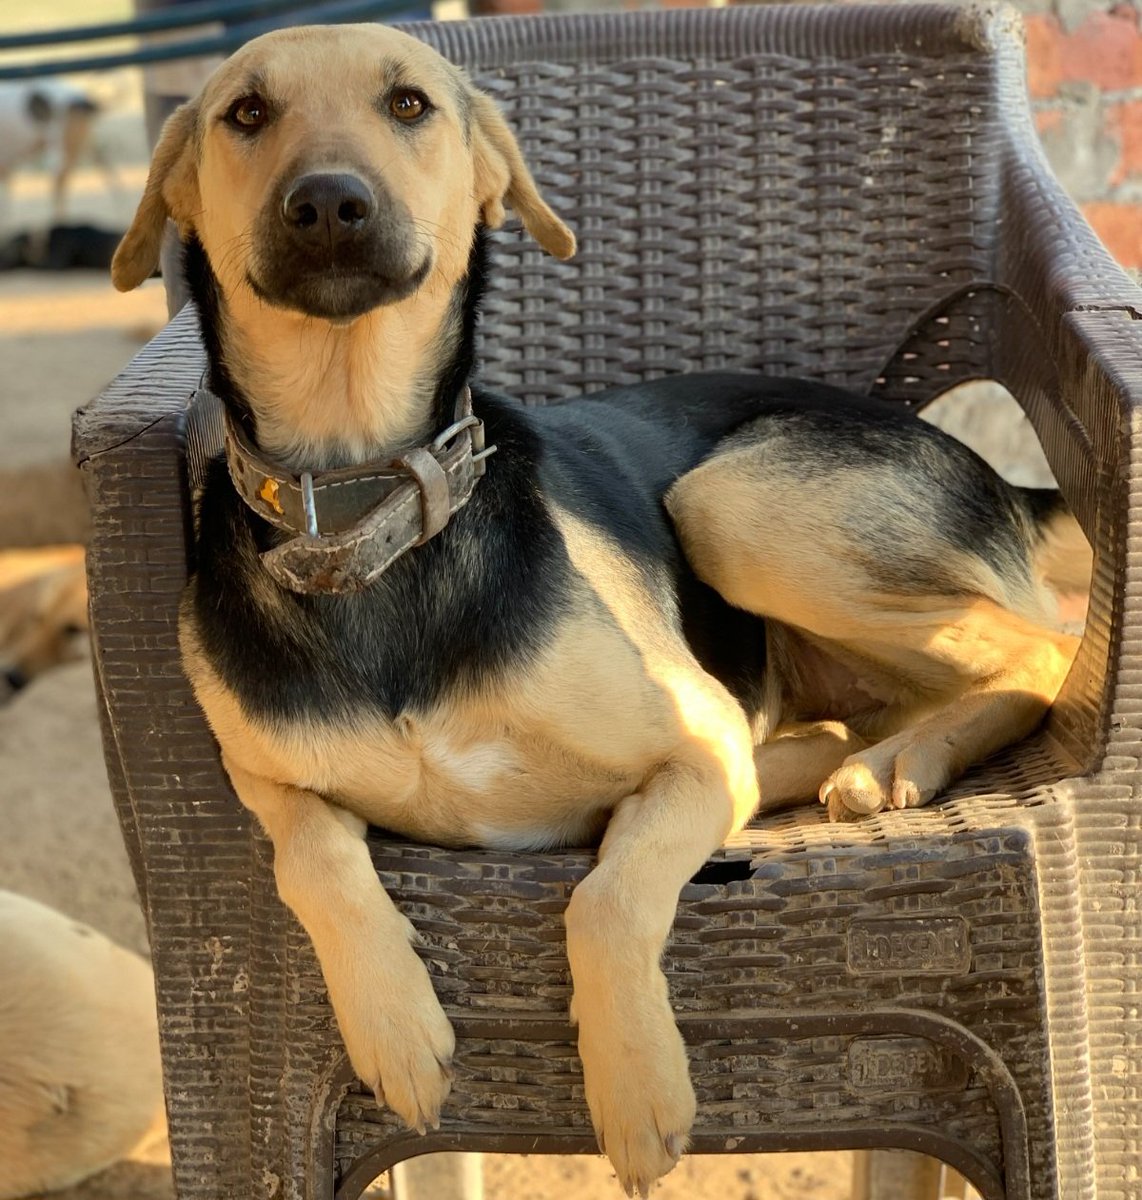 'Good afternoon from our sanctuary manager! 🌞 Meet Molly, the lovable dog who always chooses chairs over dog beds in our sanctuary. Come by and see her in action! 🐾🪑 #dogsoftwitter #sanctuarylife #MollytheChairDog'